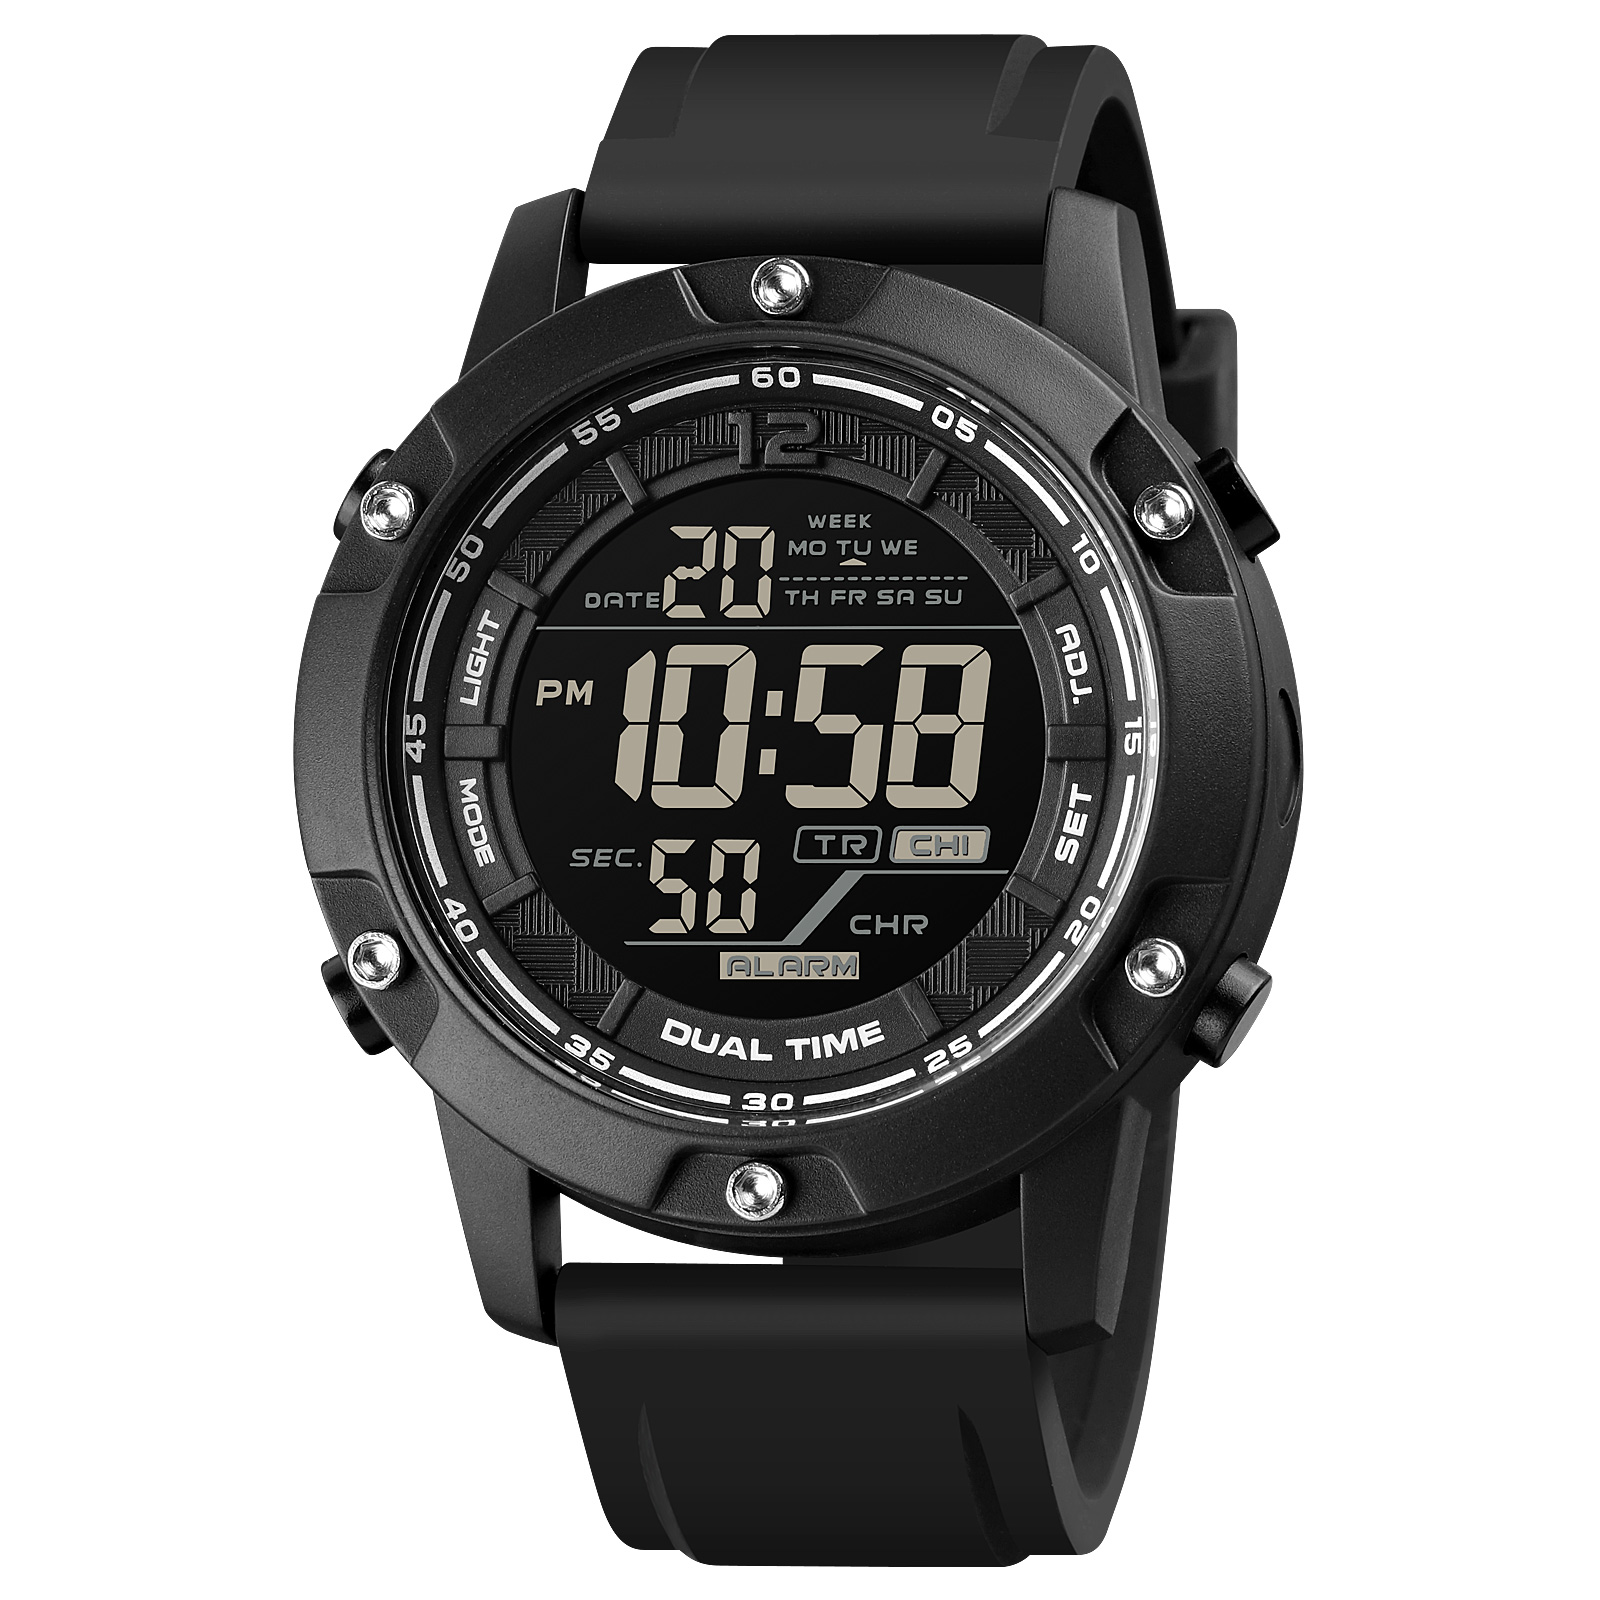 suppliers of sports watches-Skmei Watch Manufacture Co.,Ltd